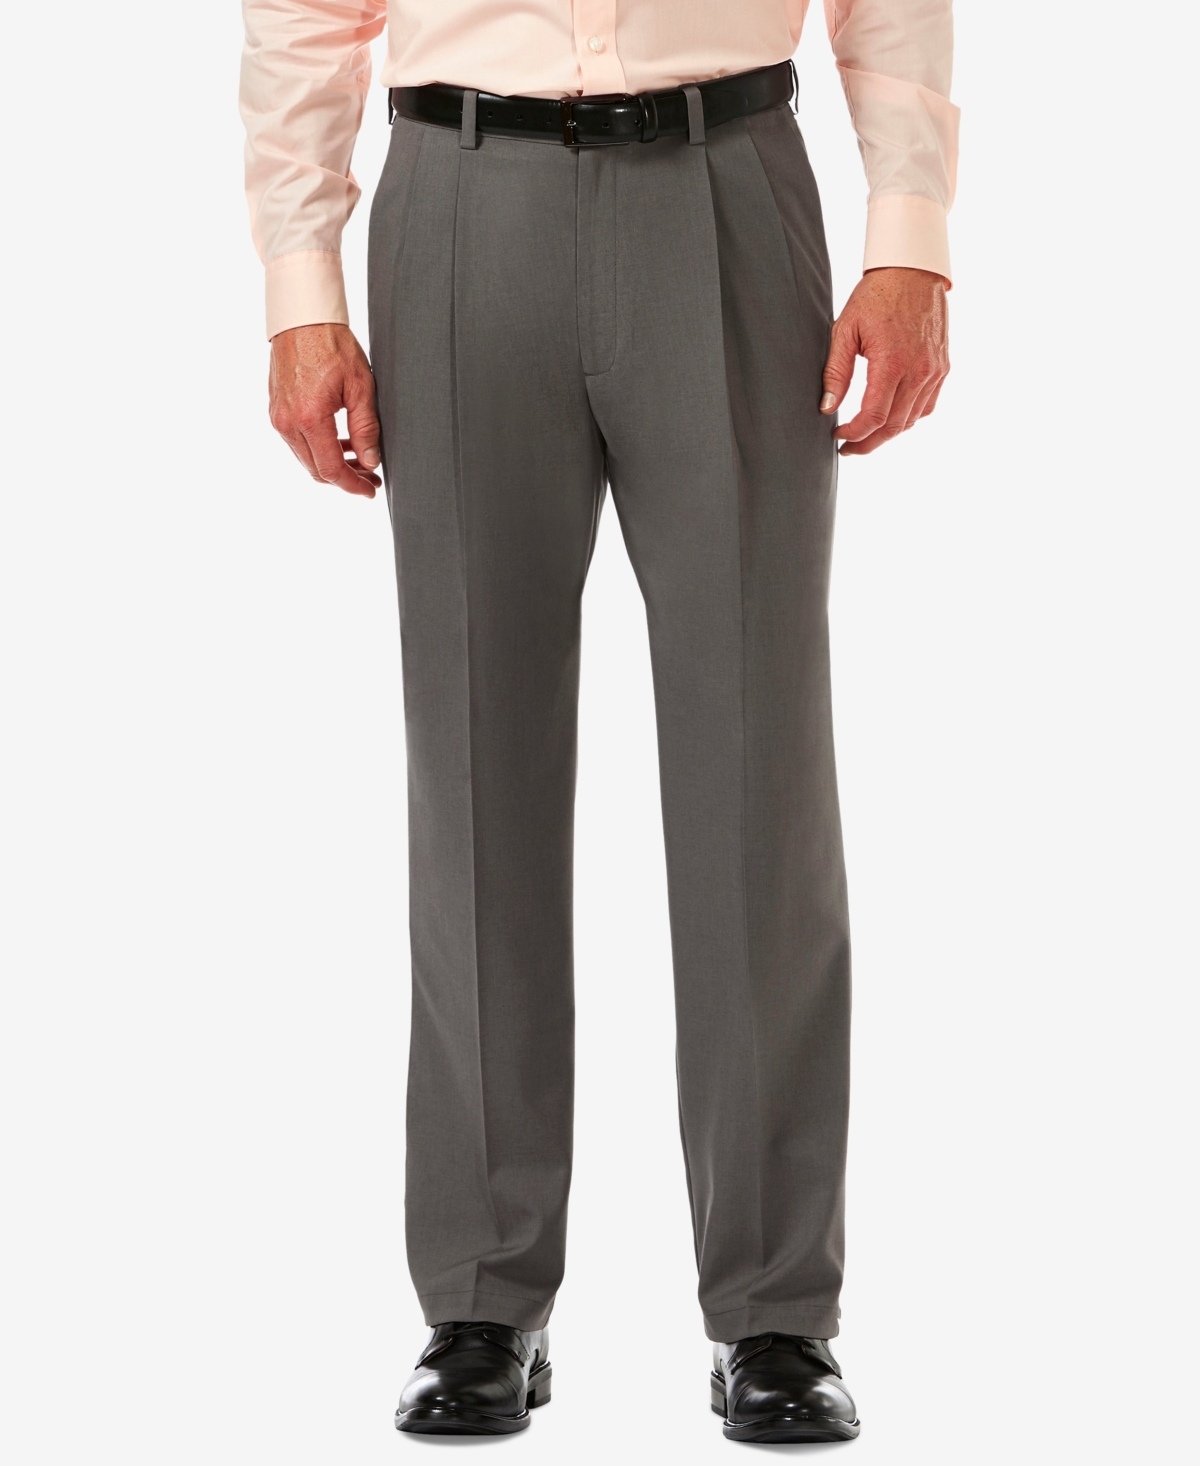 Men's Cool 18 Pro Classic-Fit Expandable Waist Pleated Stretch Dress Pants - Dark Heather Grey